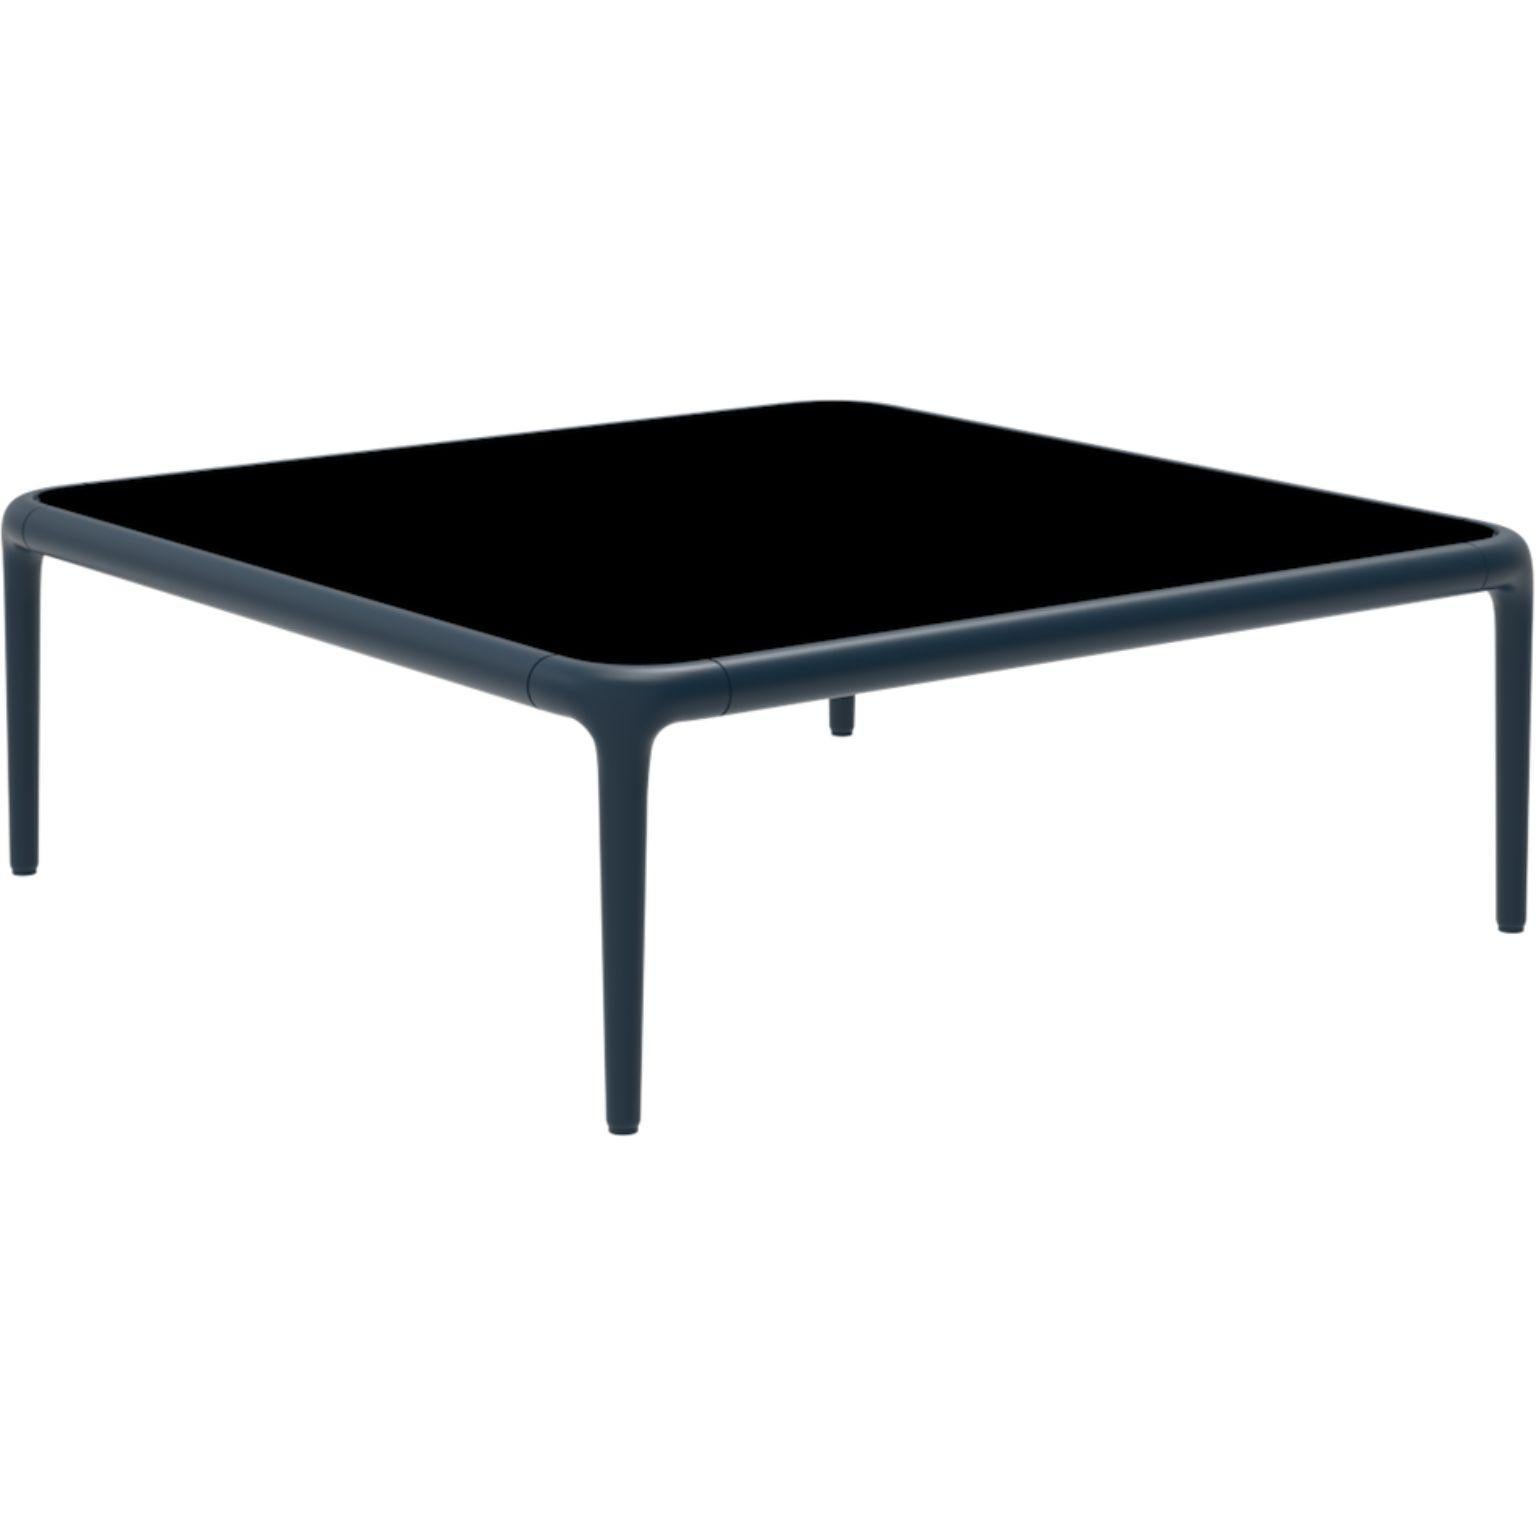 Xaloc Navy coffee table 80 with Glass top by Mowee
Dimensions: D80 x W80 x H28 cm
Materials: Aluminum, tinted tempered glass top.
Also available in different aluminum colors and finishes (HPL Black Edge or Neolith).

Xaloc synthesizes the lines